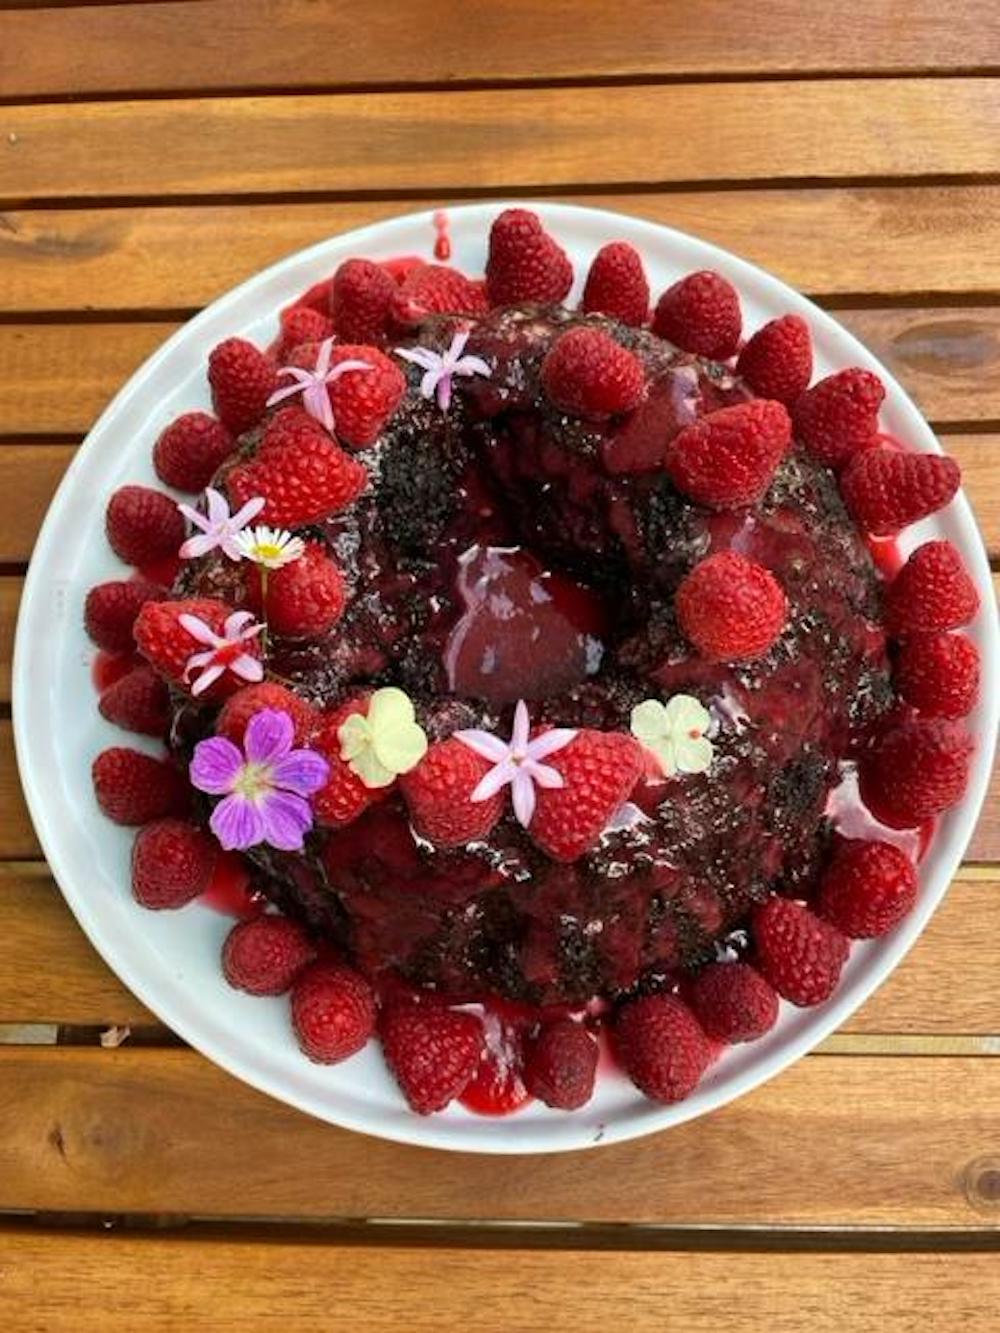 fonio chocolate cake with raspberry coulis by pierre thiam